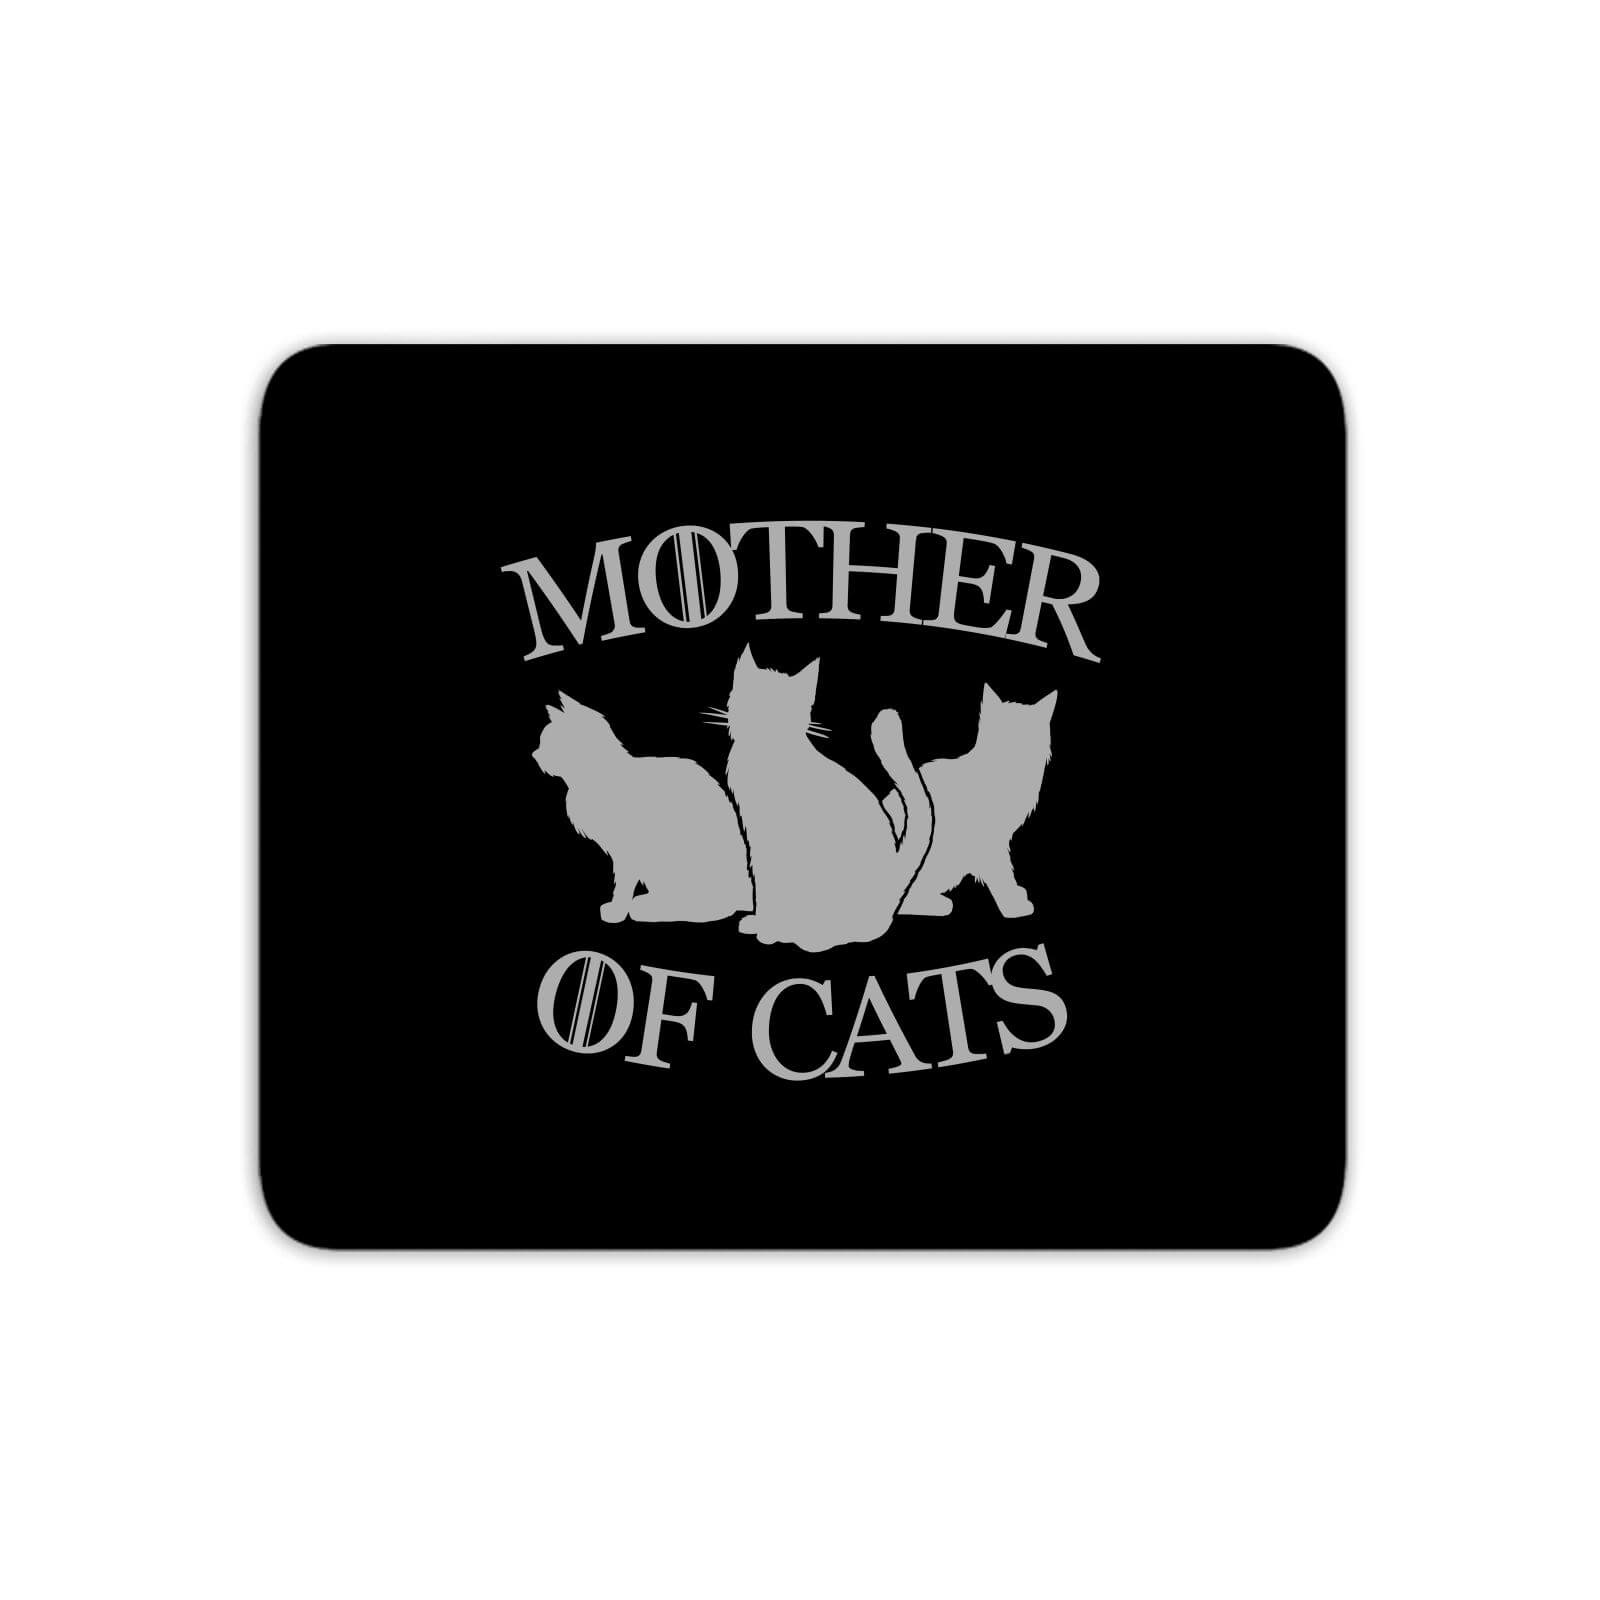 Mother Of Cats Black Tee Mouse Mat